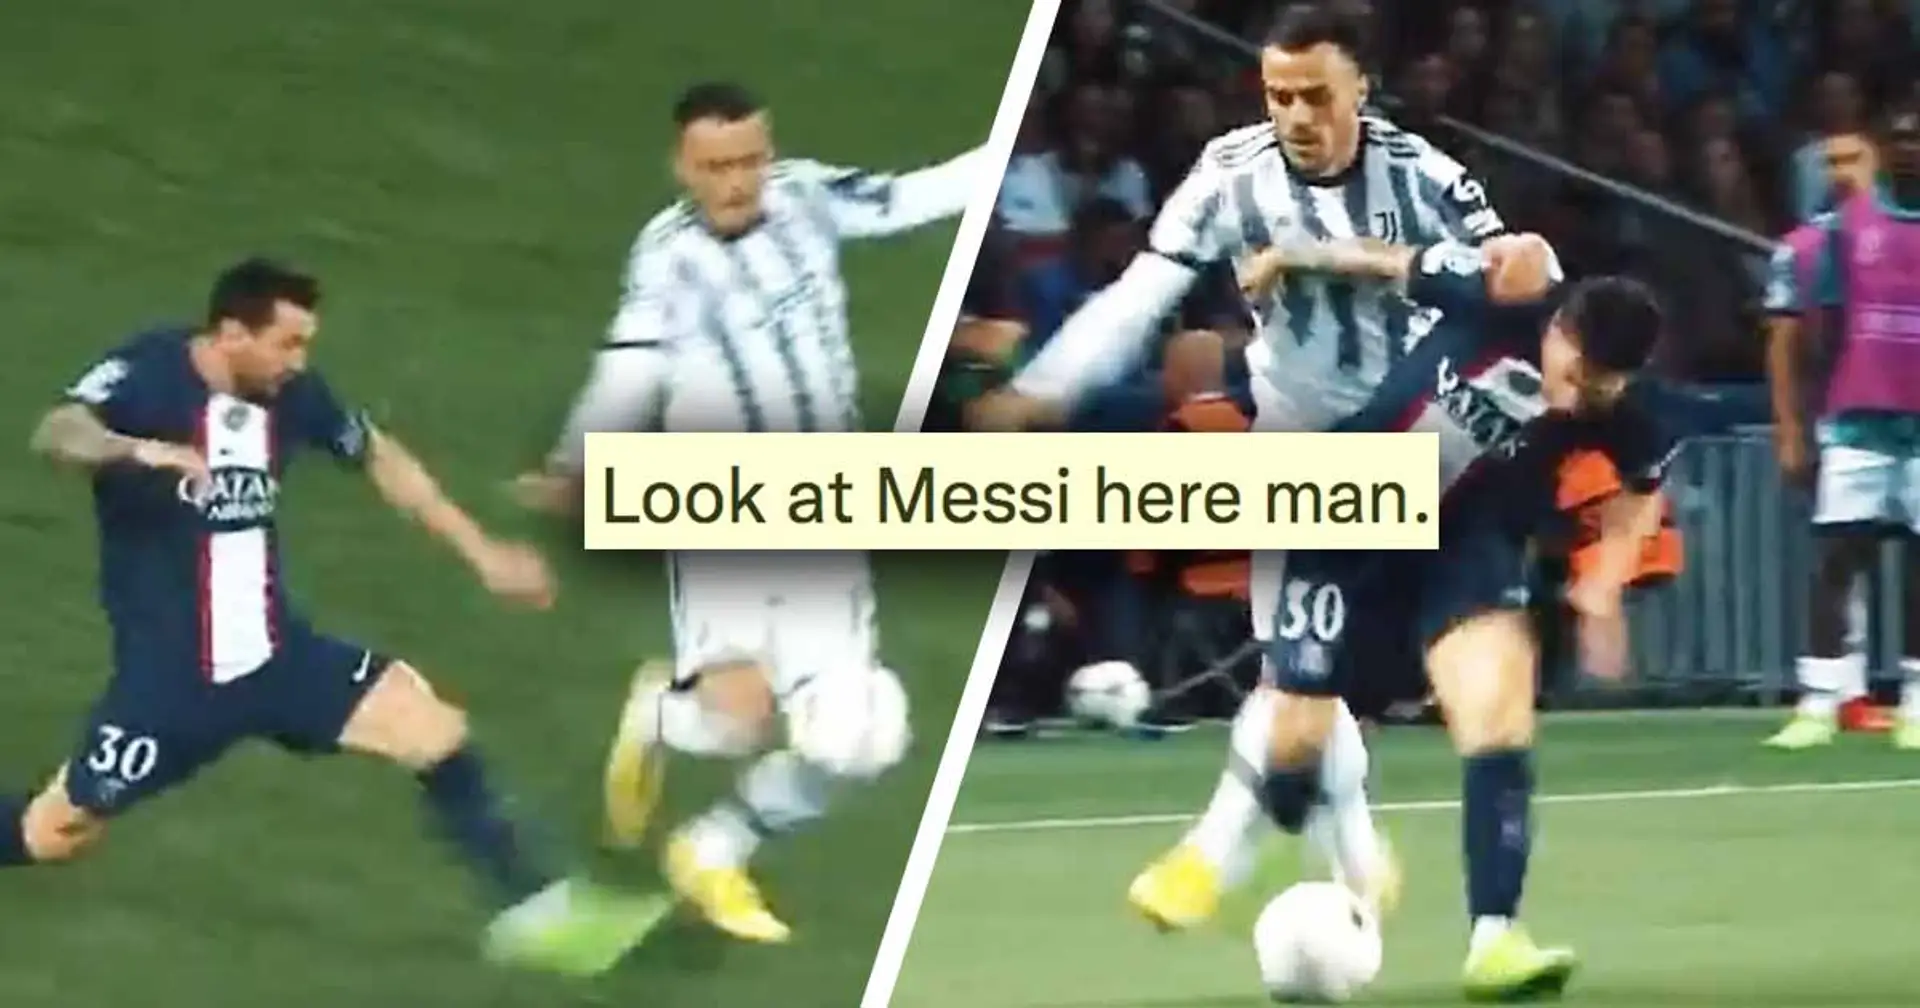 'It's not about the statistics': One Messi episode from Juventus game goes viral